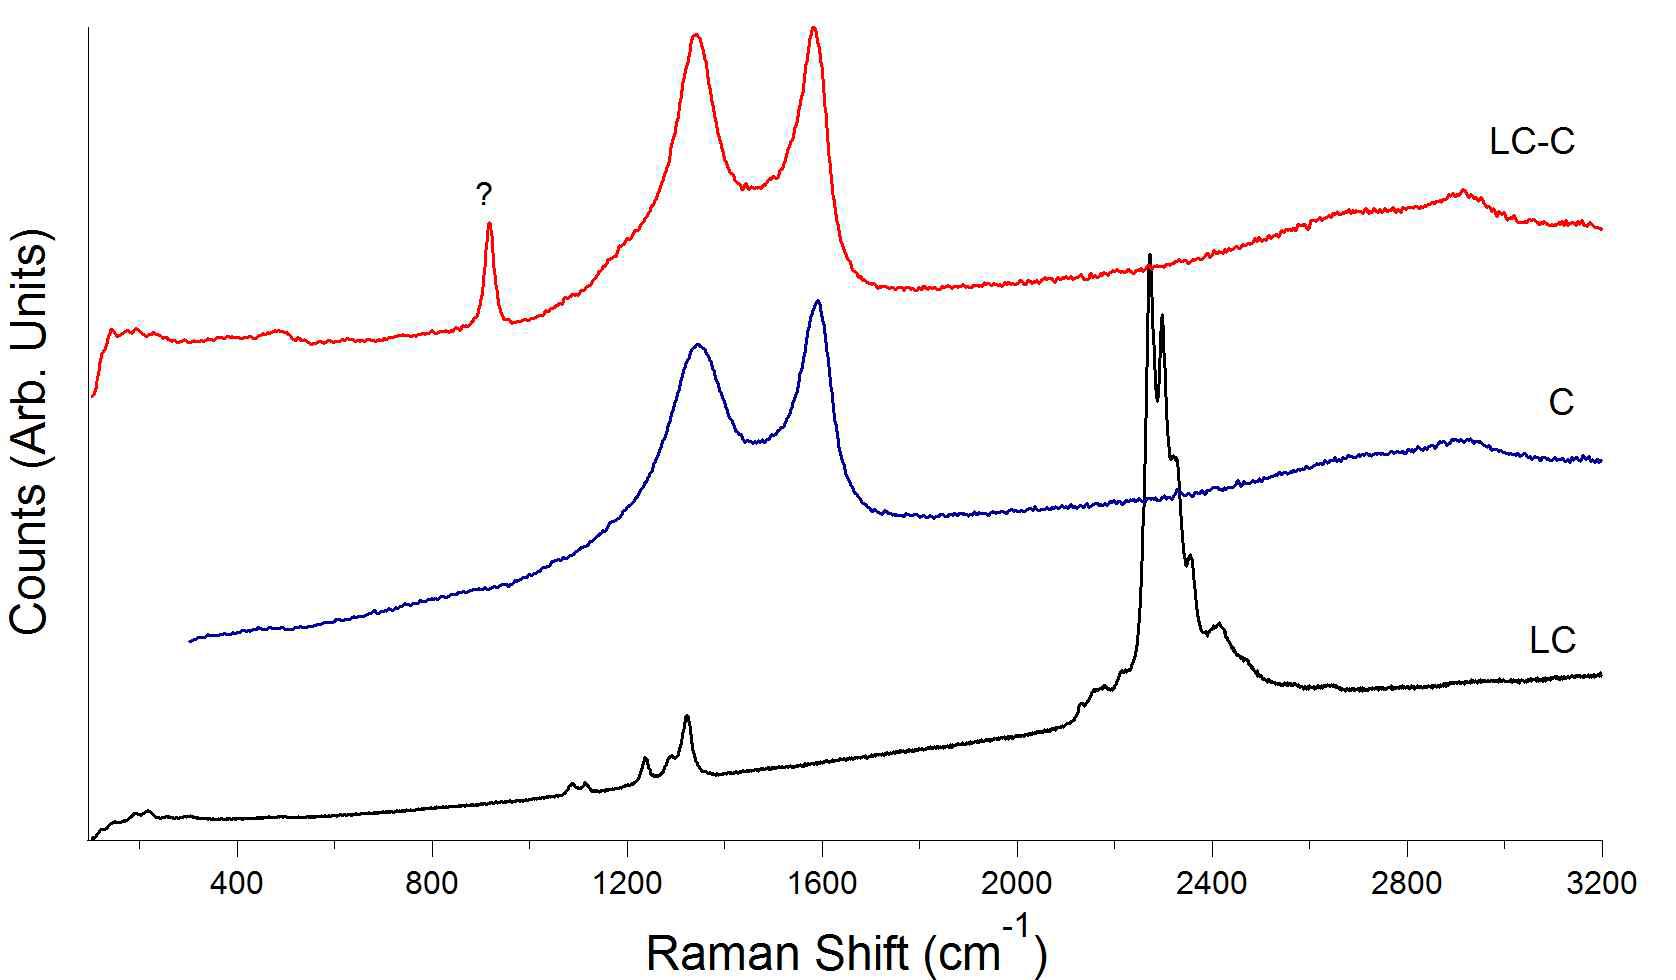 Raman spectra of as received CMK-3, LC and ball milled LC-C